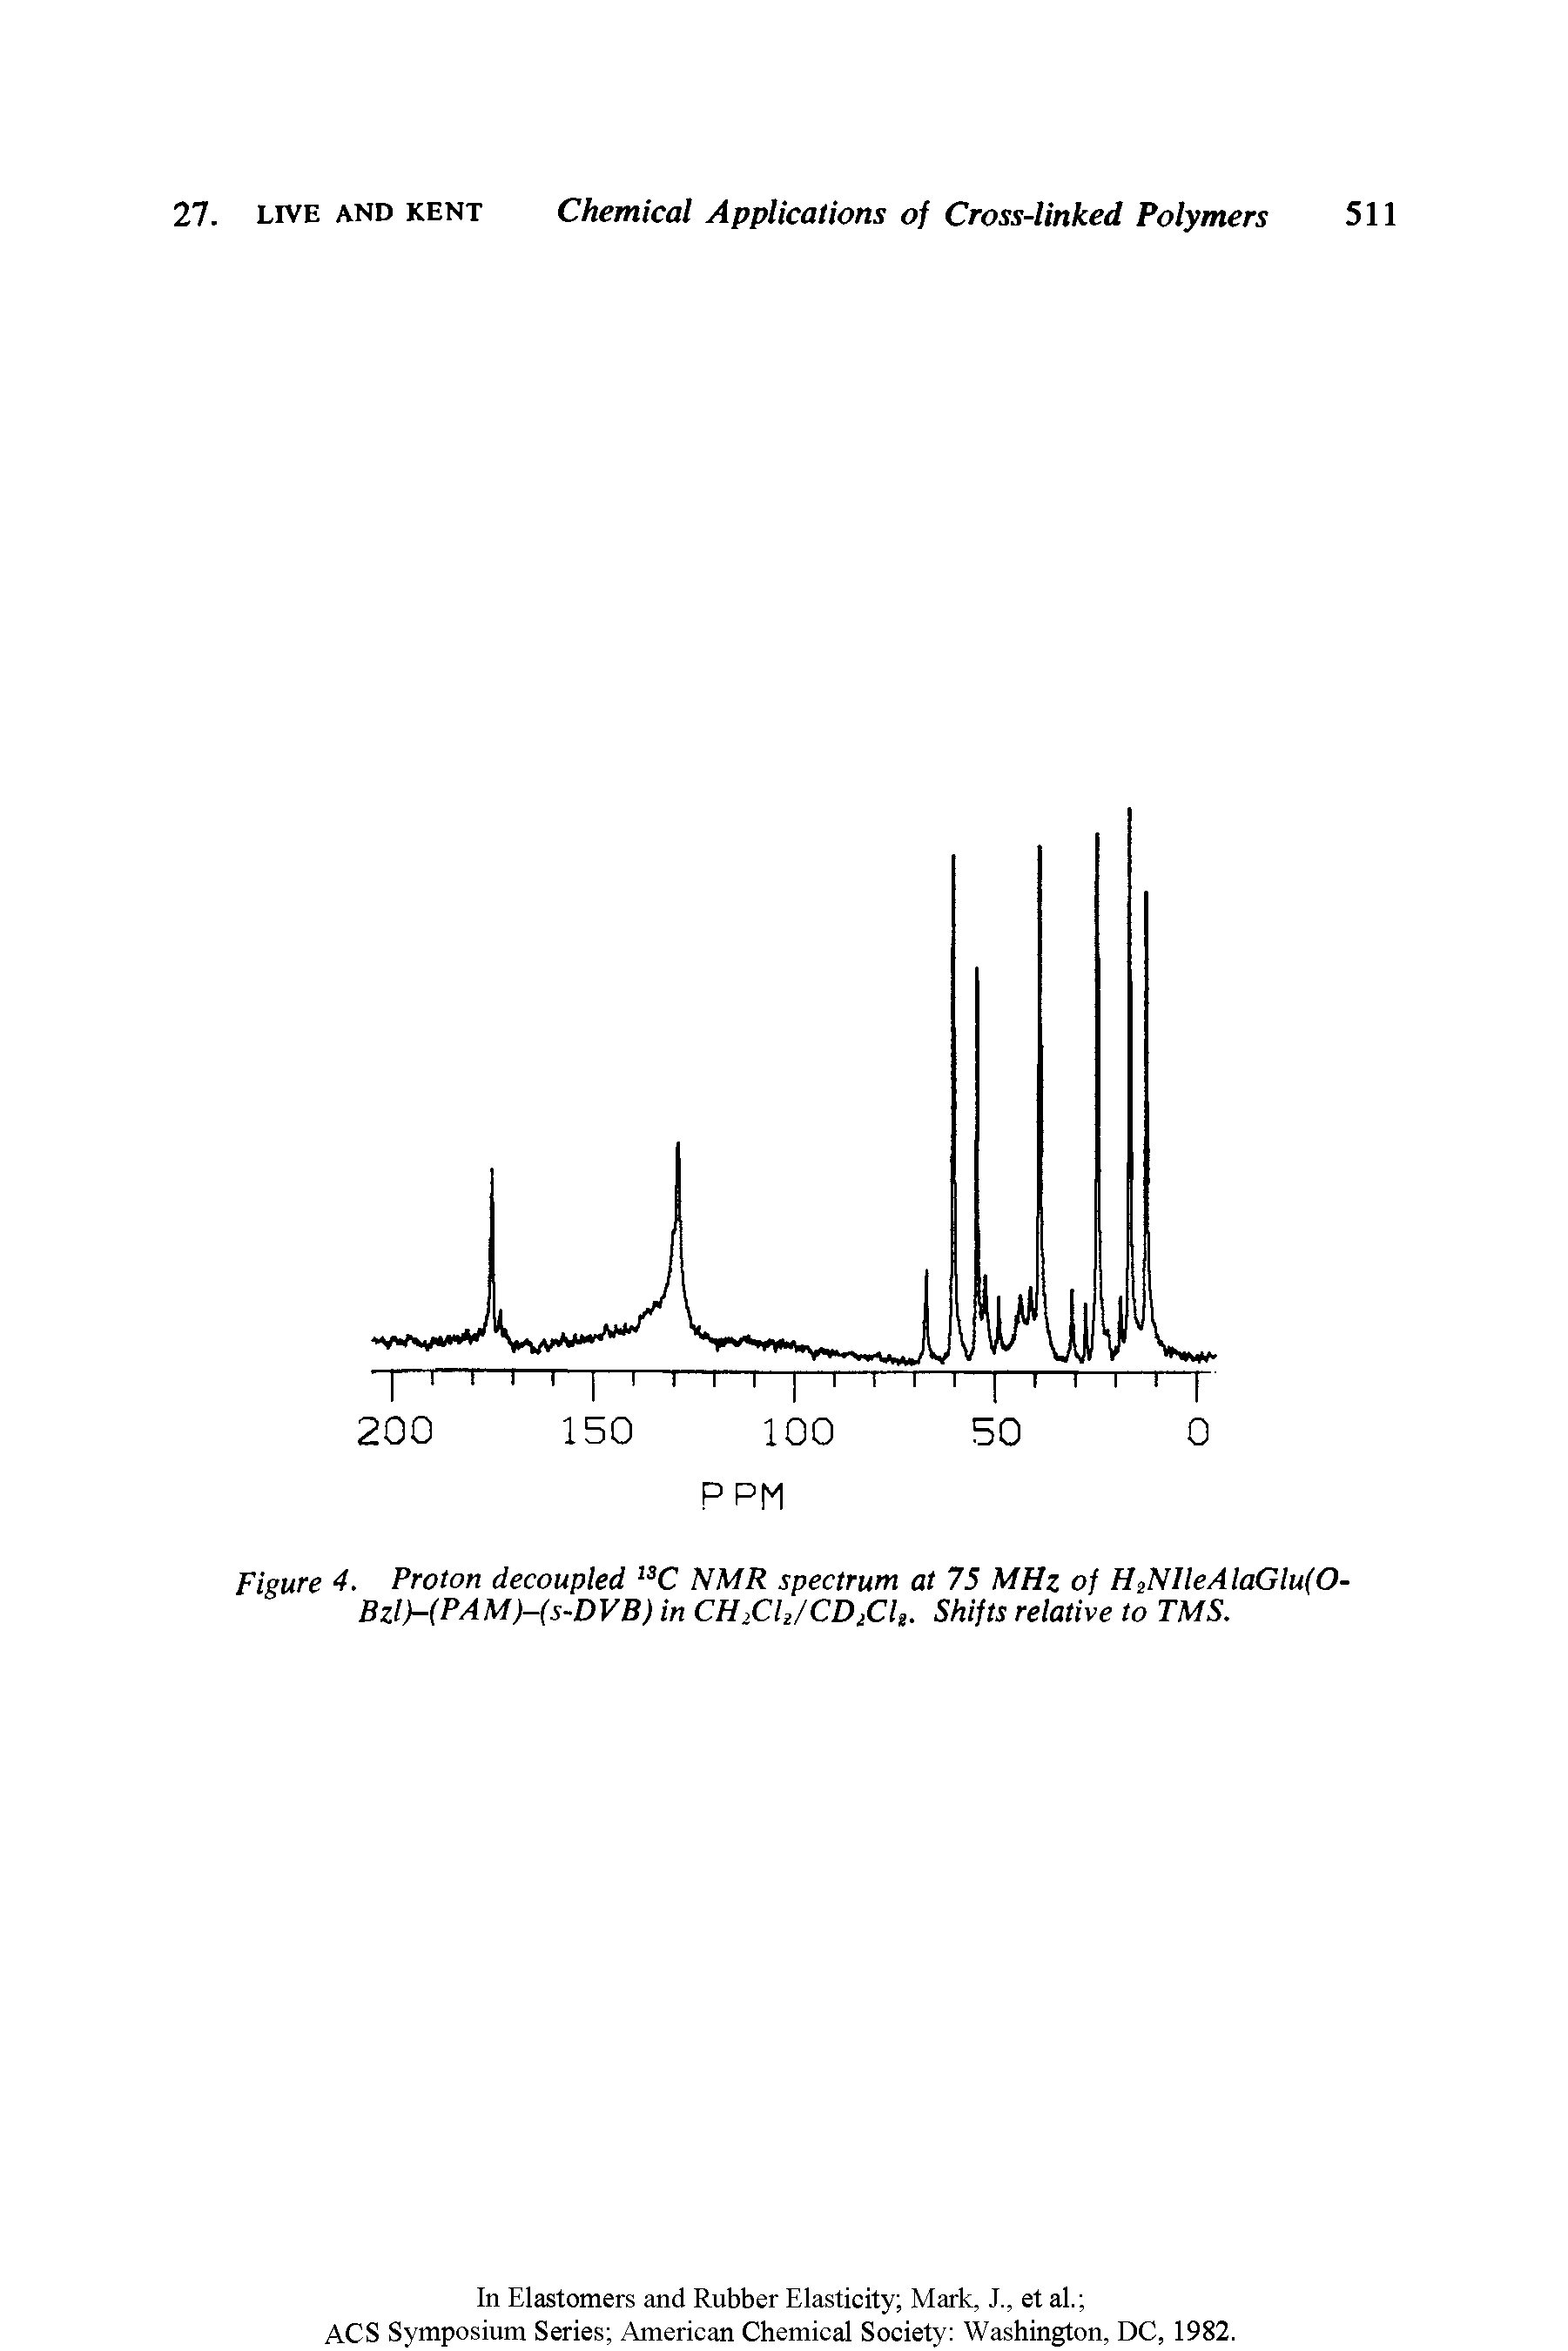 Figure 4. Proton decoupled 13C NMR spectrum at 75 MHz of H2NlleAlaGlu(0-BzlHPAM)-(s-DVB) in CH2Cl2/CD2Cl2. Shifts relative to TMS.